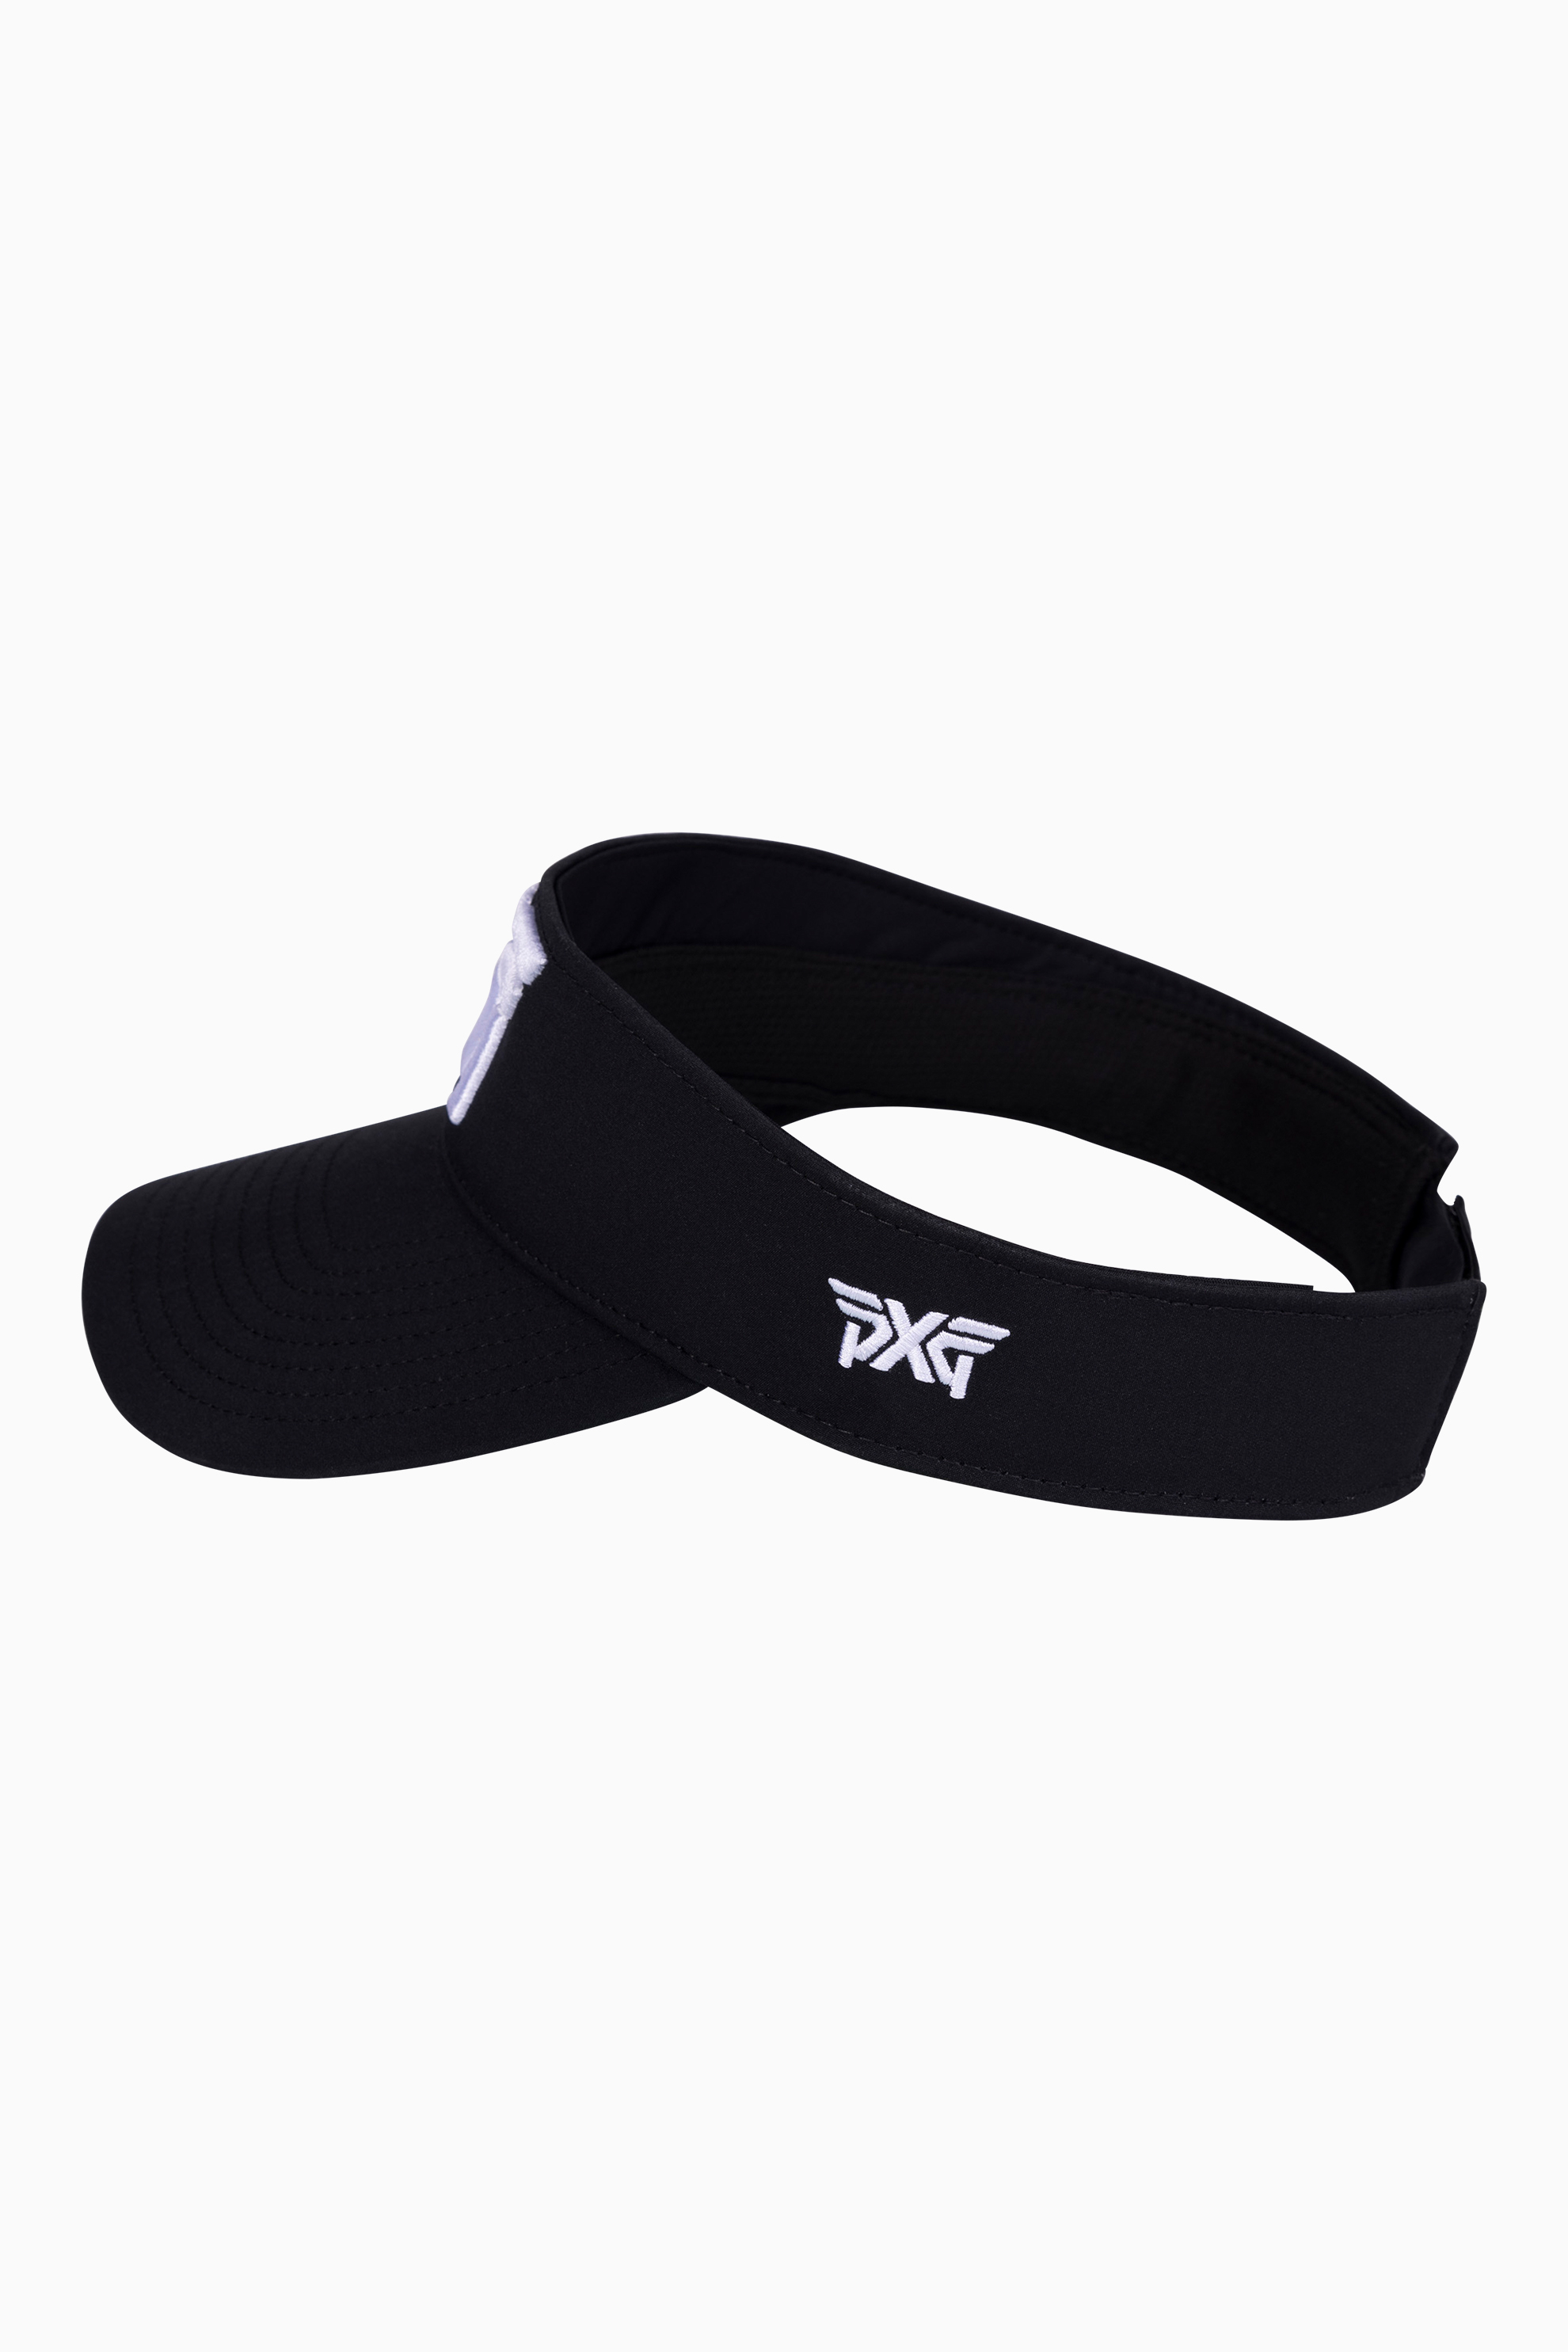 Sport Visor | Shop the Gear, Quality Clubs and Golf Apparel, at Accessories Golf Highest PXG